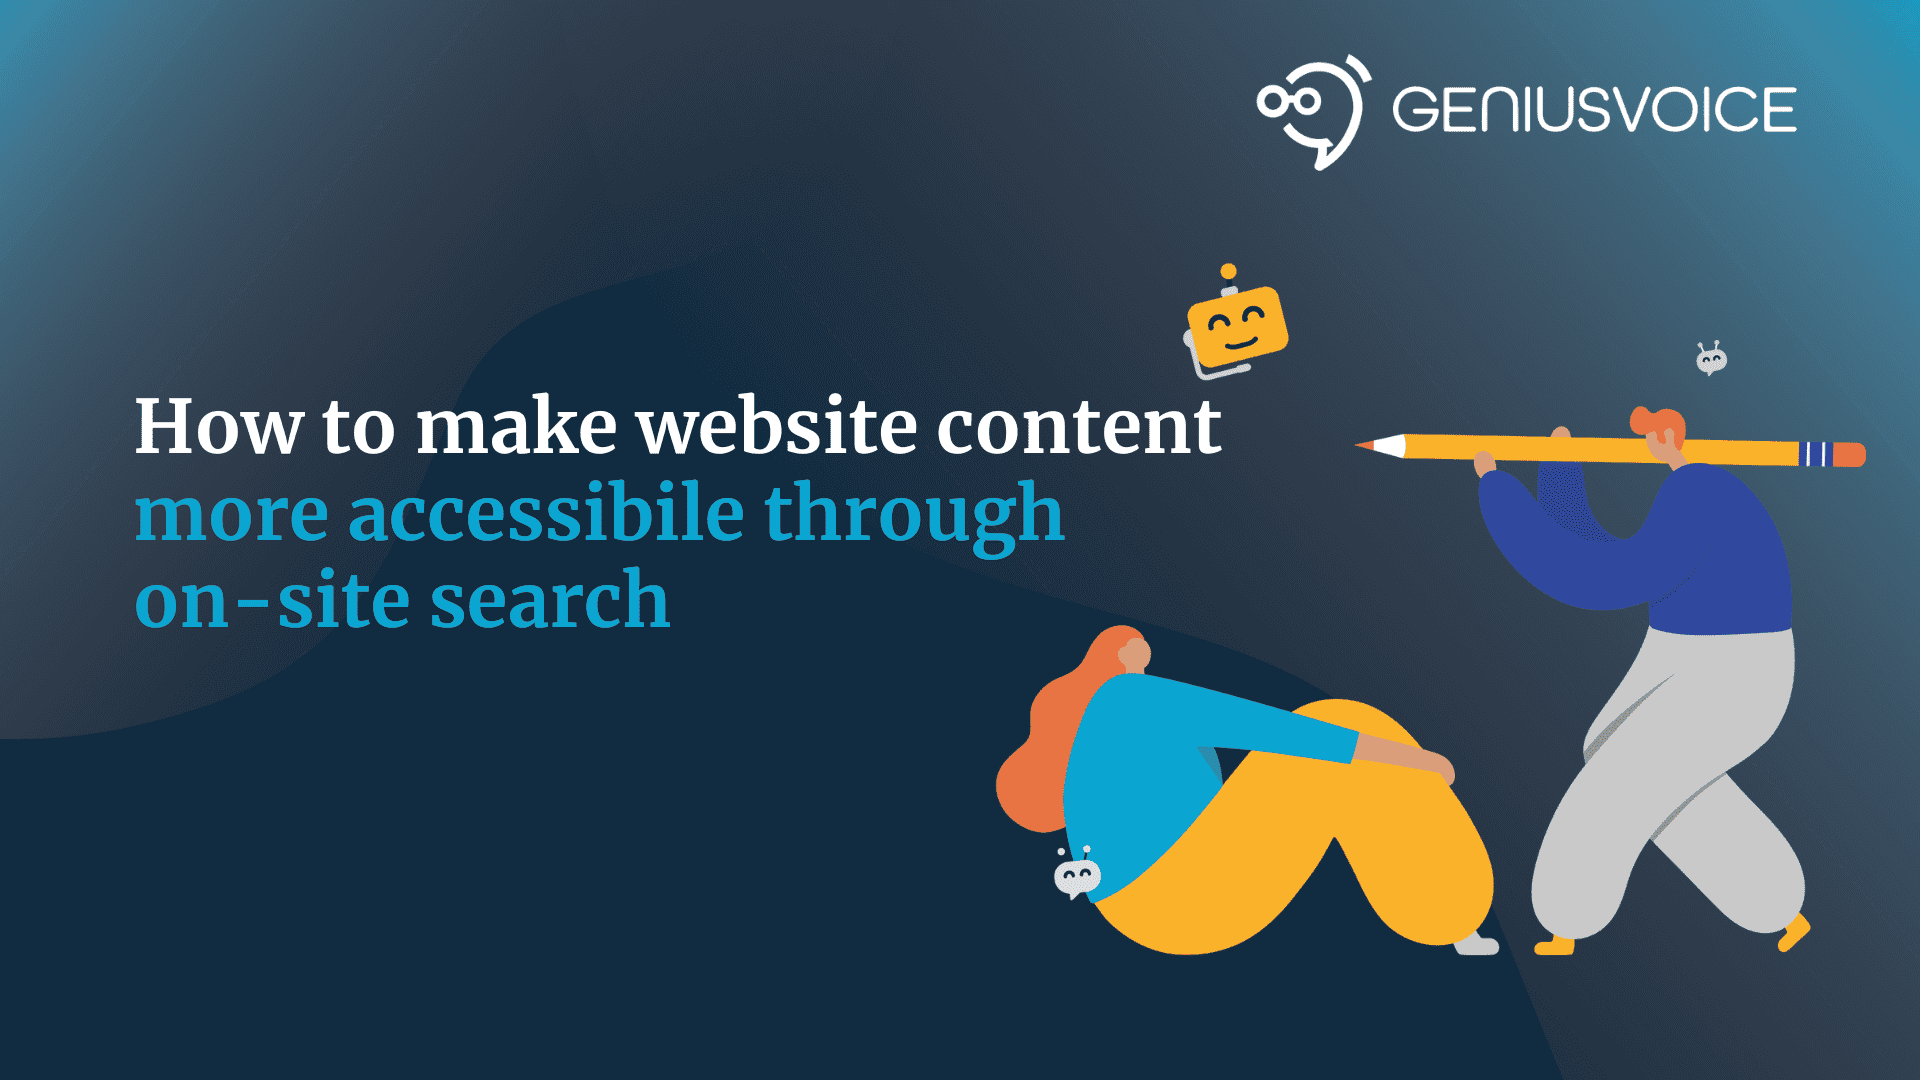 How to make website content more accessible through on-site search